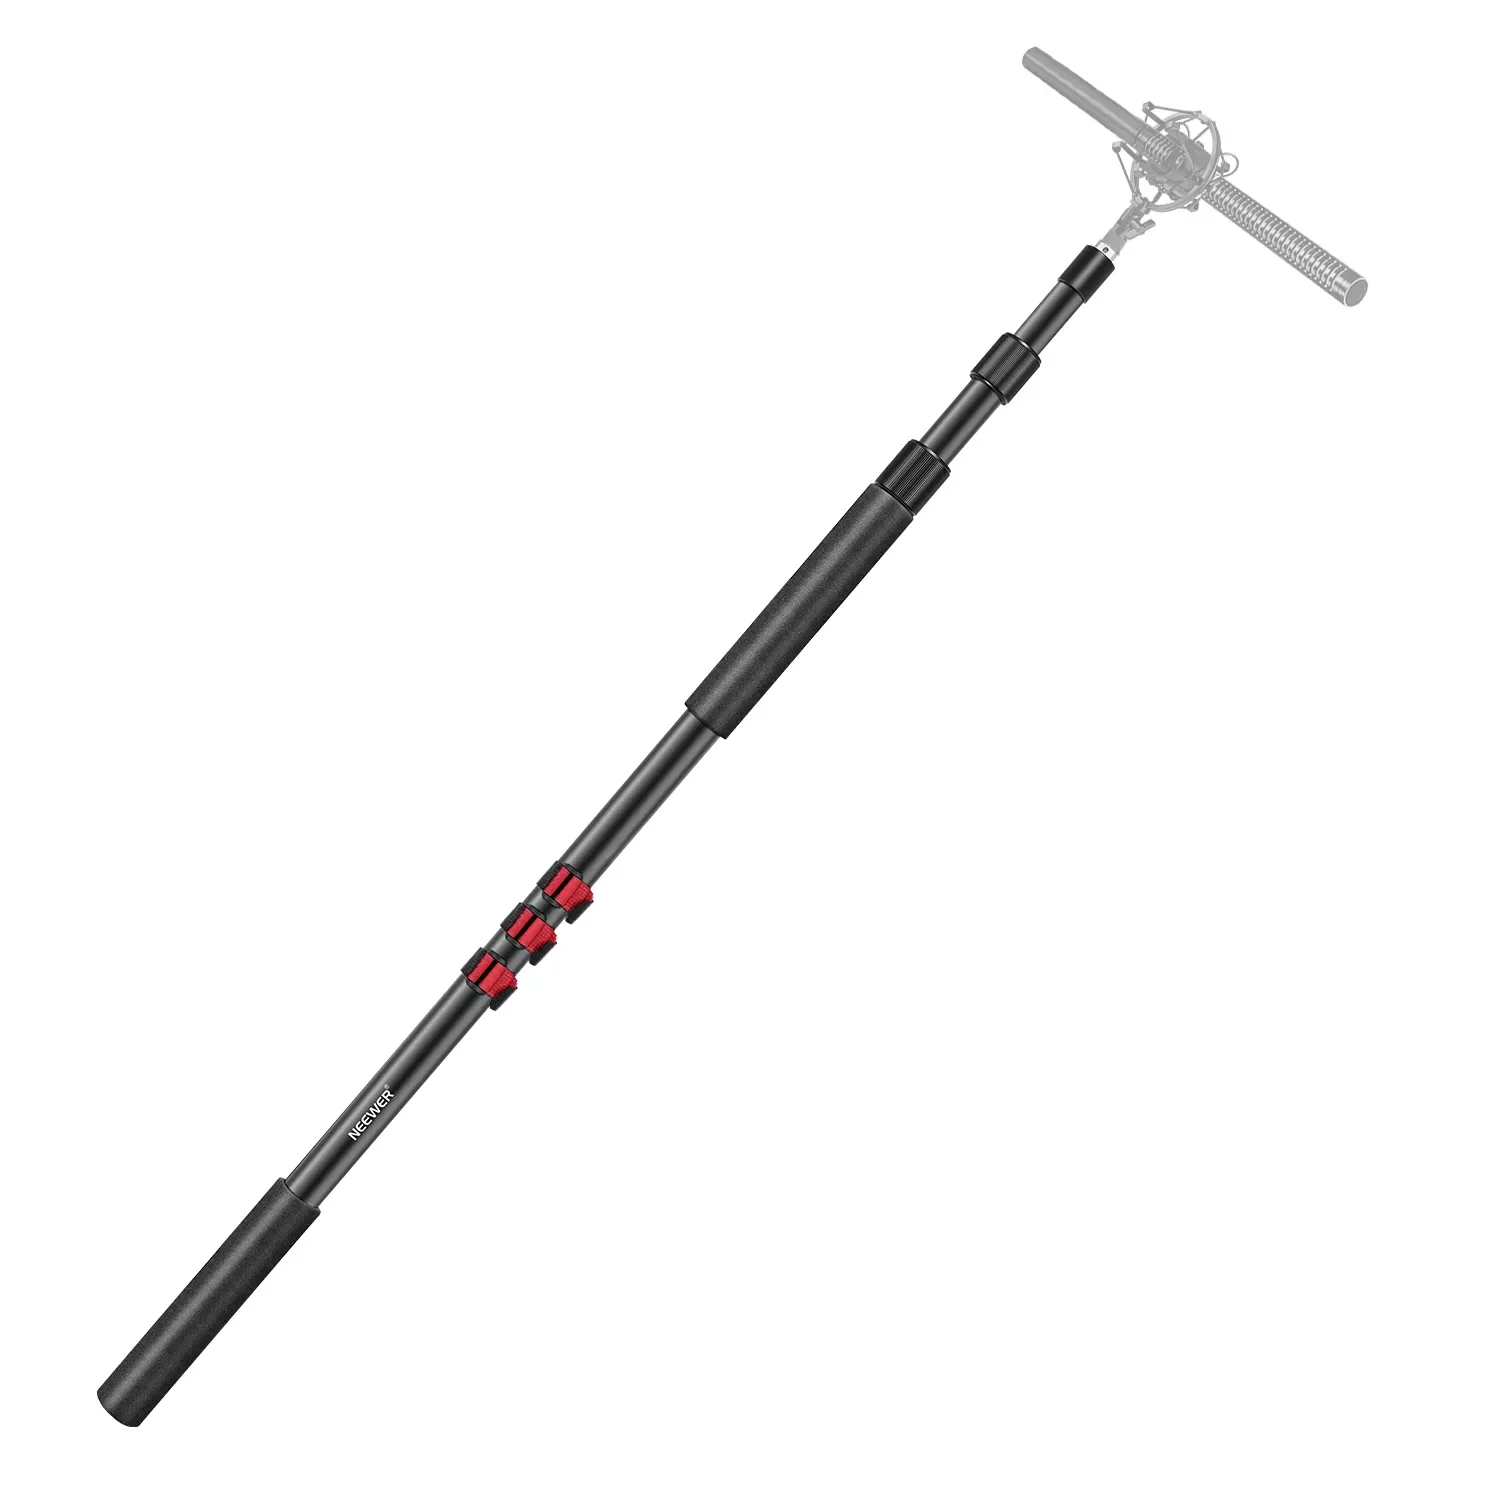 NEW NEW Neewer NW-7000 Microphone Boom Arm, 3-Section Extendable Handheld Mic Arm with 1/4